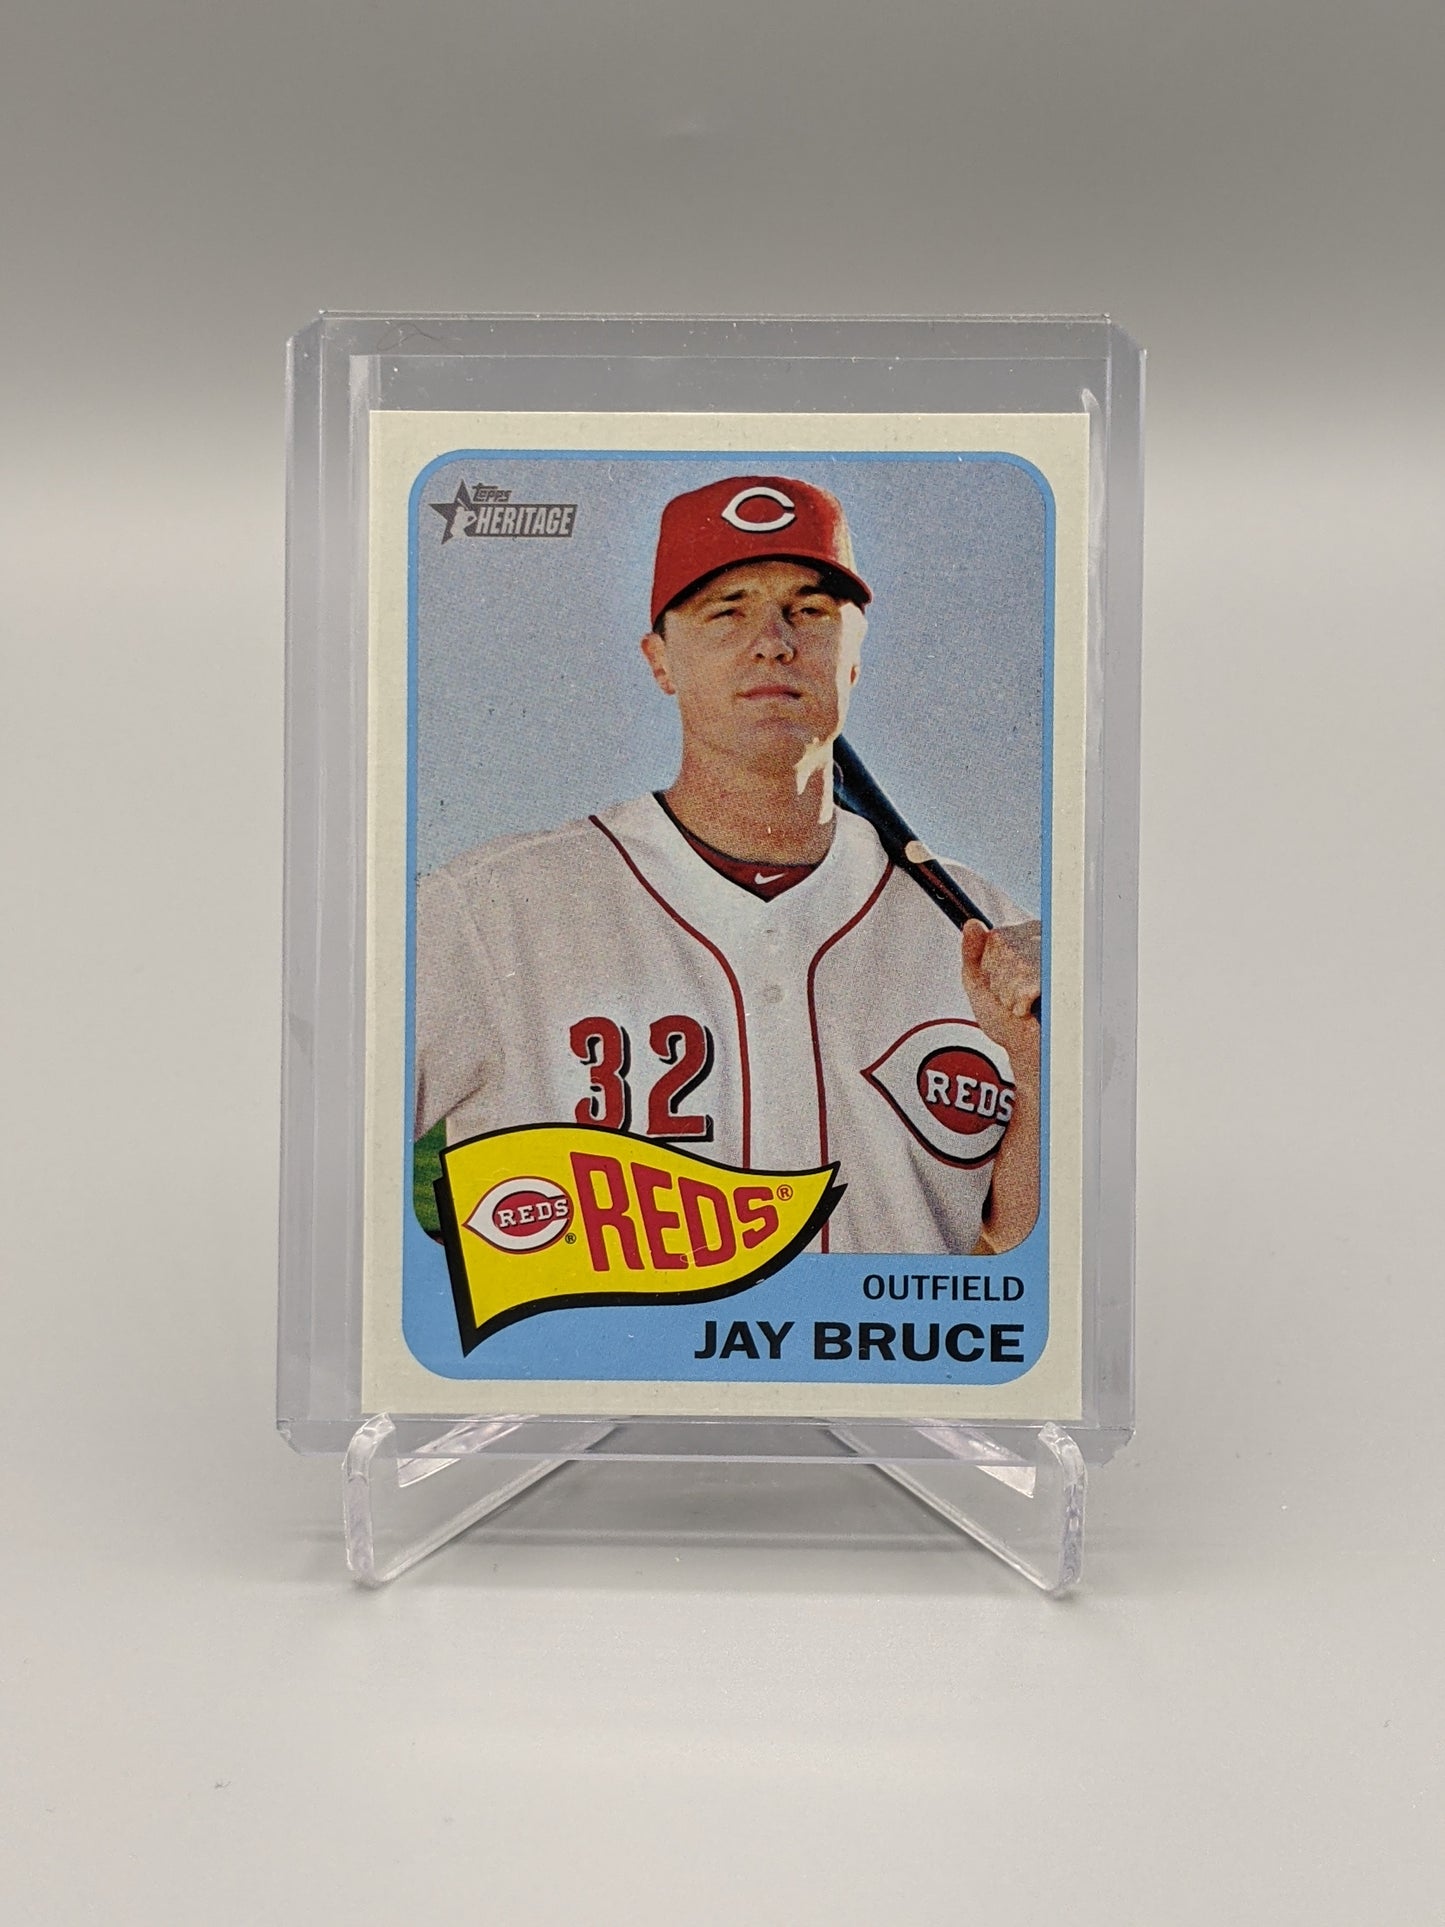 2014 Topps Heritage SP #432 Jay Bruce Reds